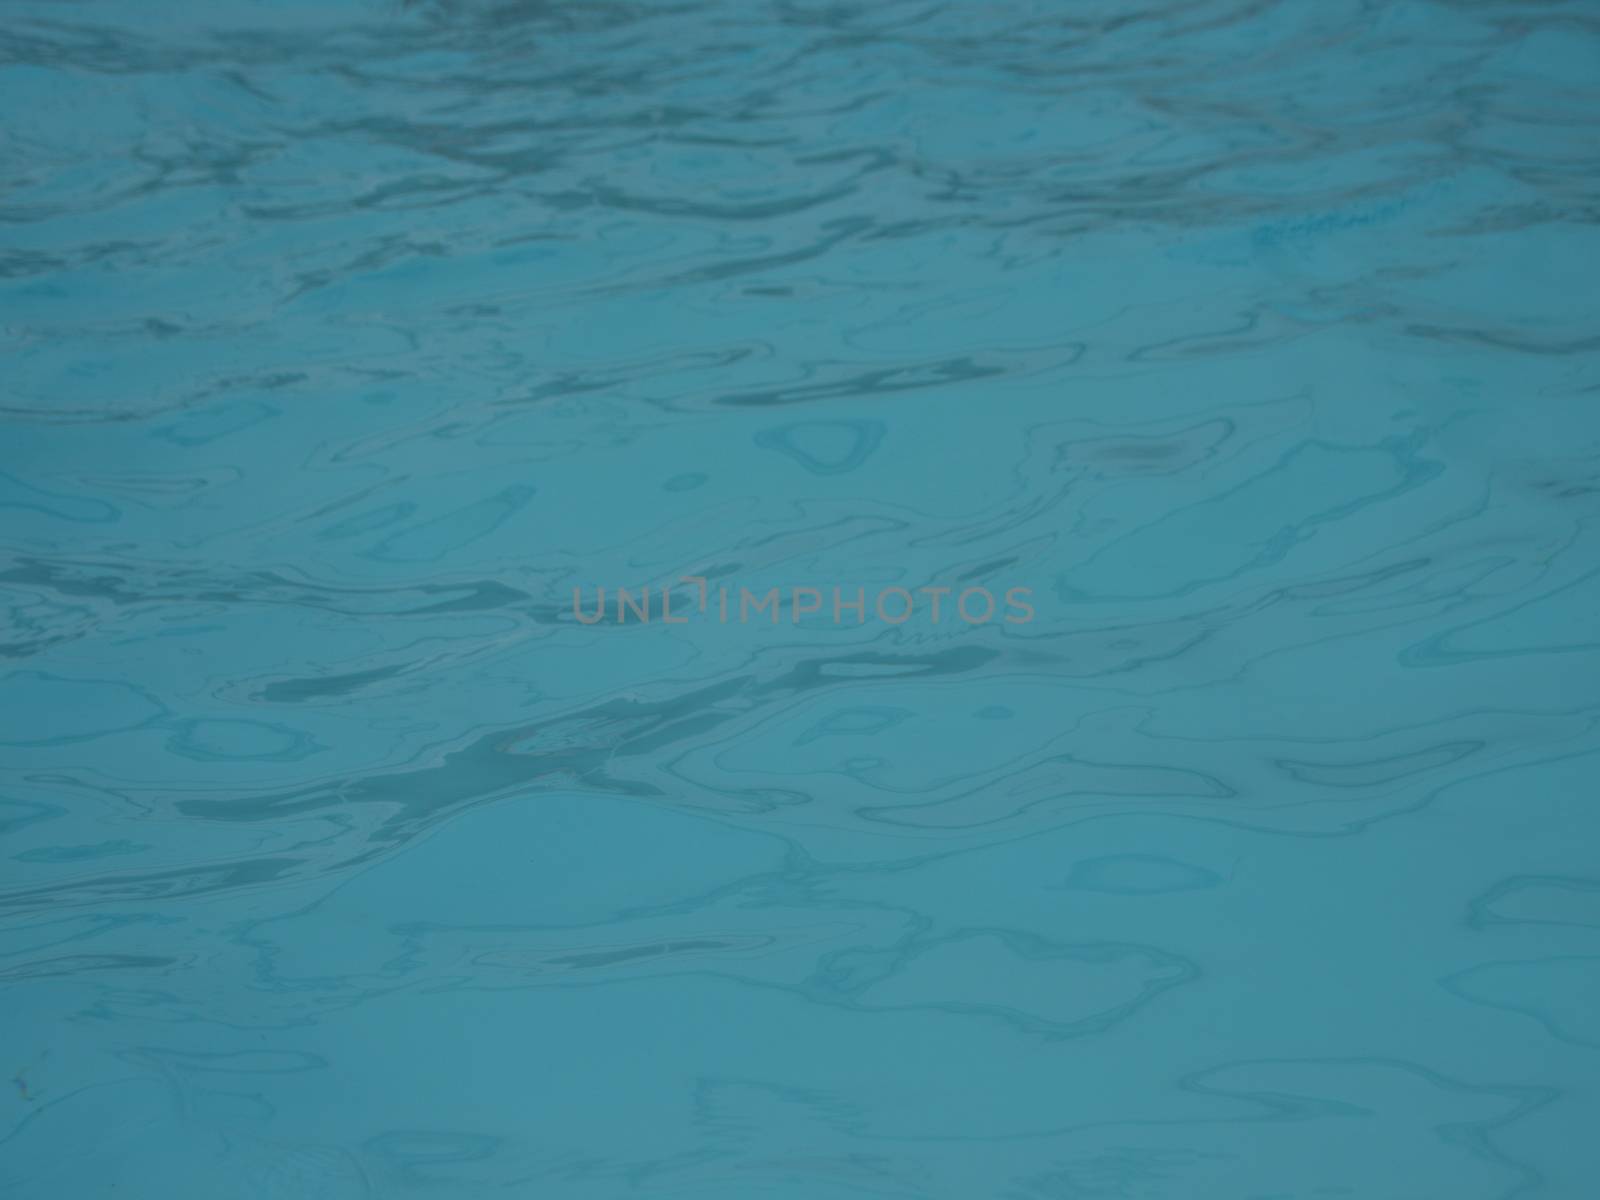 Soft Blue Meditation Water in Swimming Pool with Waves. Smooth Contrast.